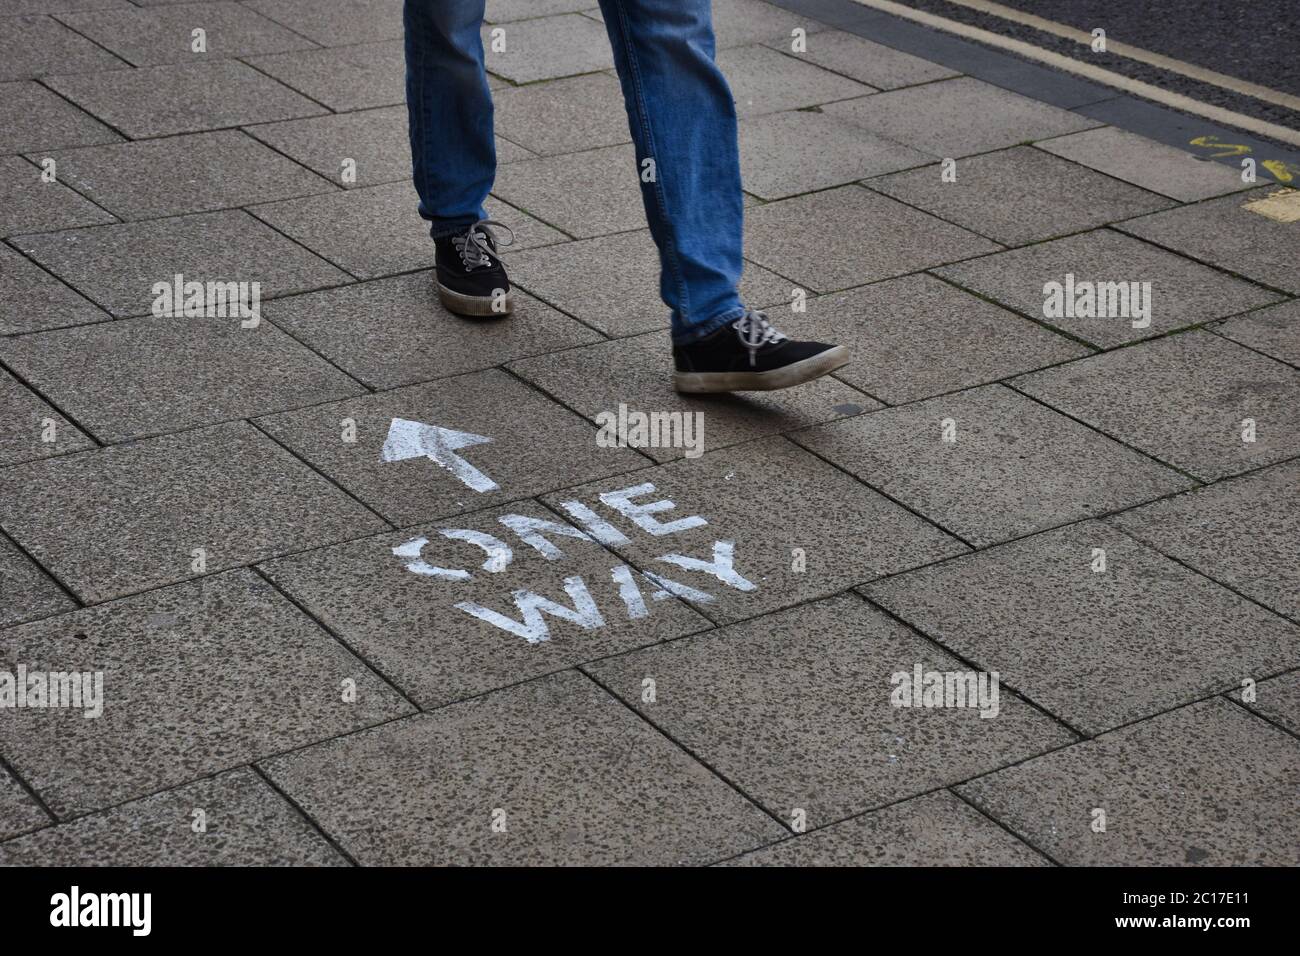 Oxford, UK- 06 13 2020: Oxford introduces social distancing to the city centre streets. Here a person walks past a pavement sign the wrong way. Stock Photo